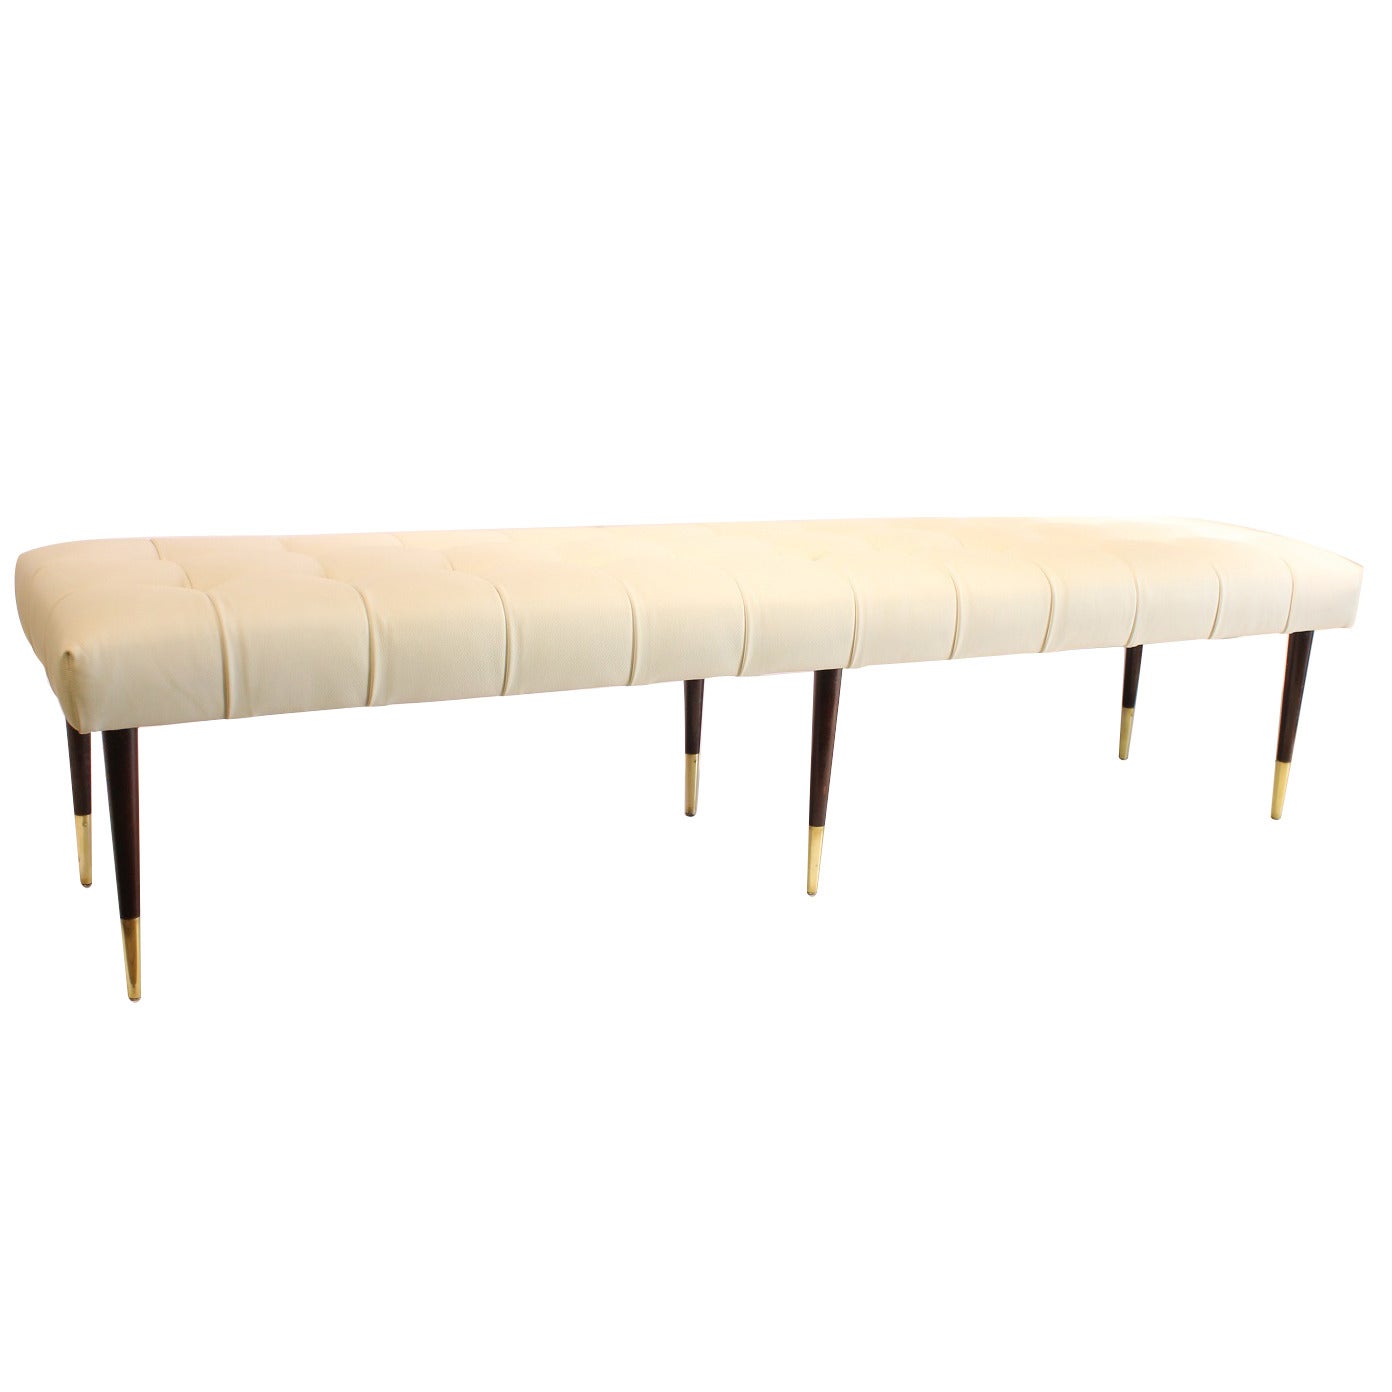 Tufted Leather Bench by Paul Frankl